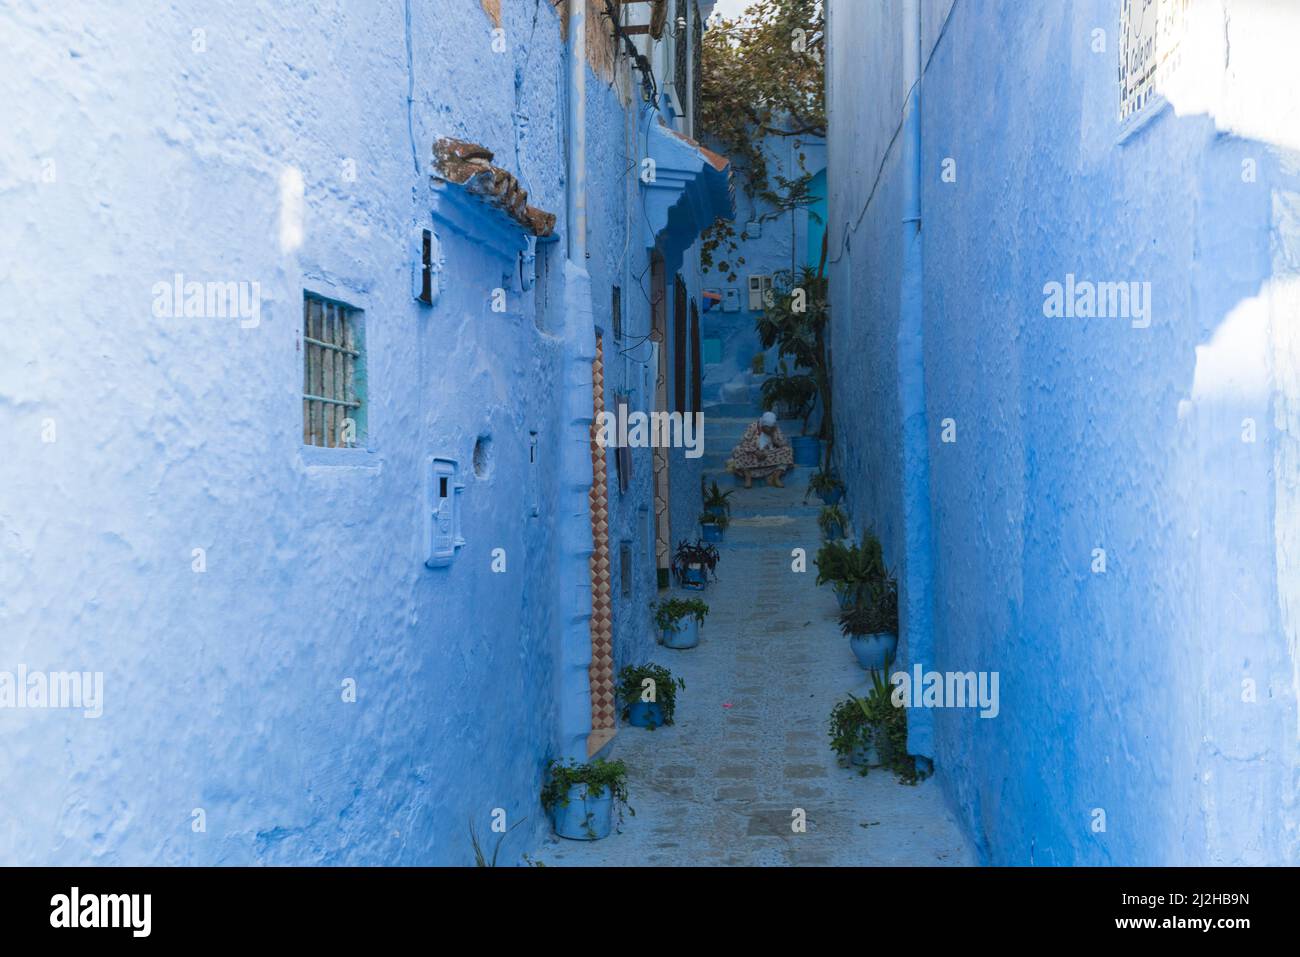 Morocco, Chefchaouen, Narrow alley and traditional blue houses Stock Photo